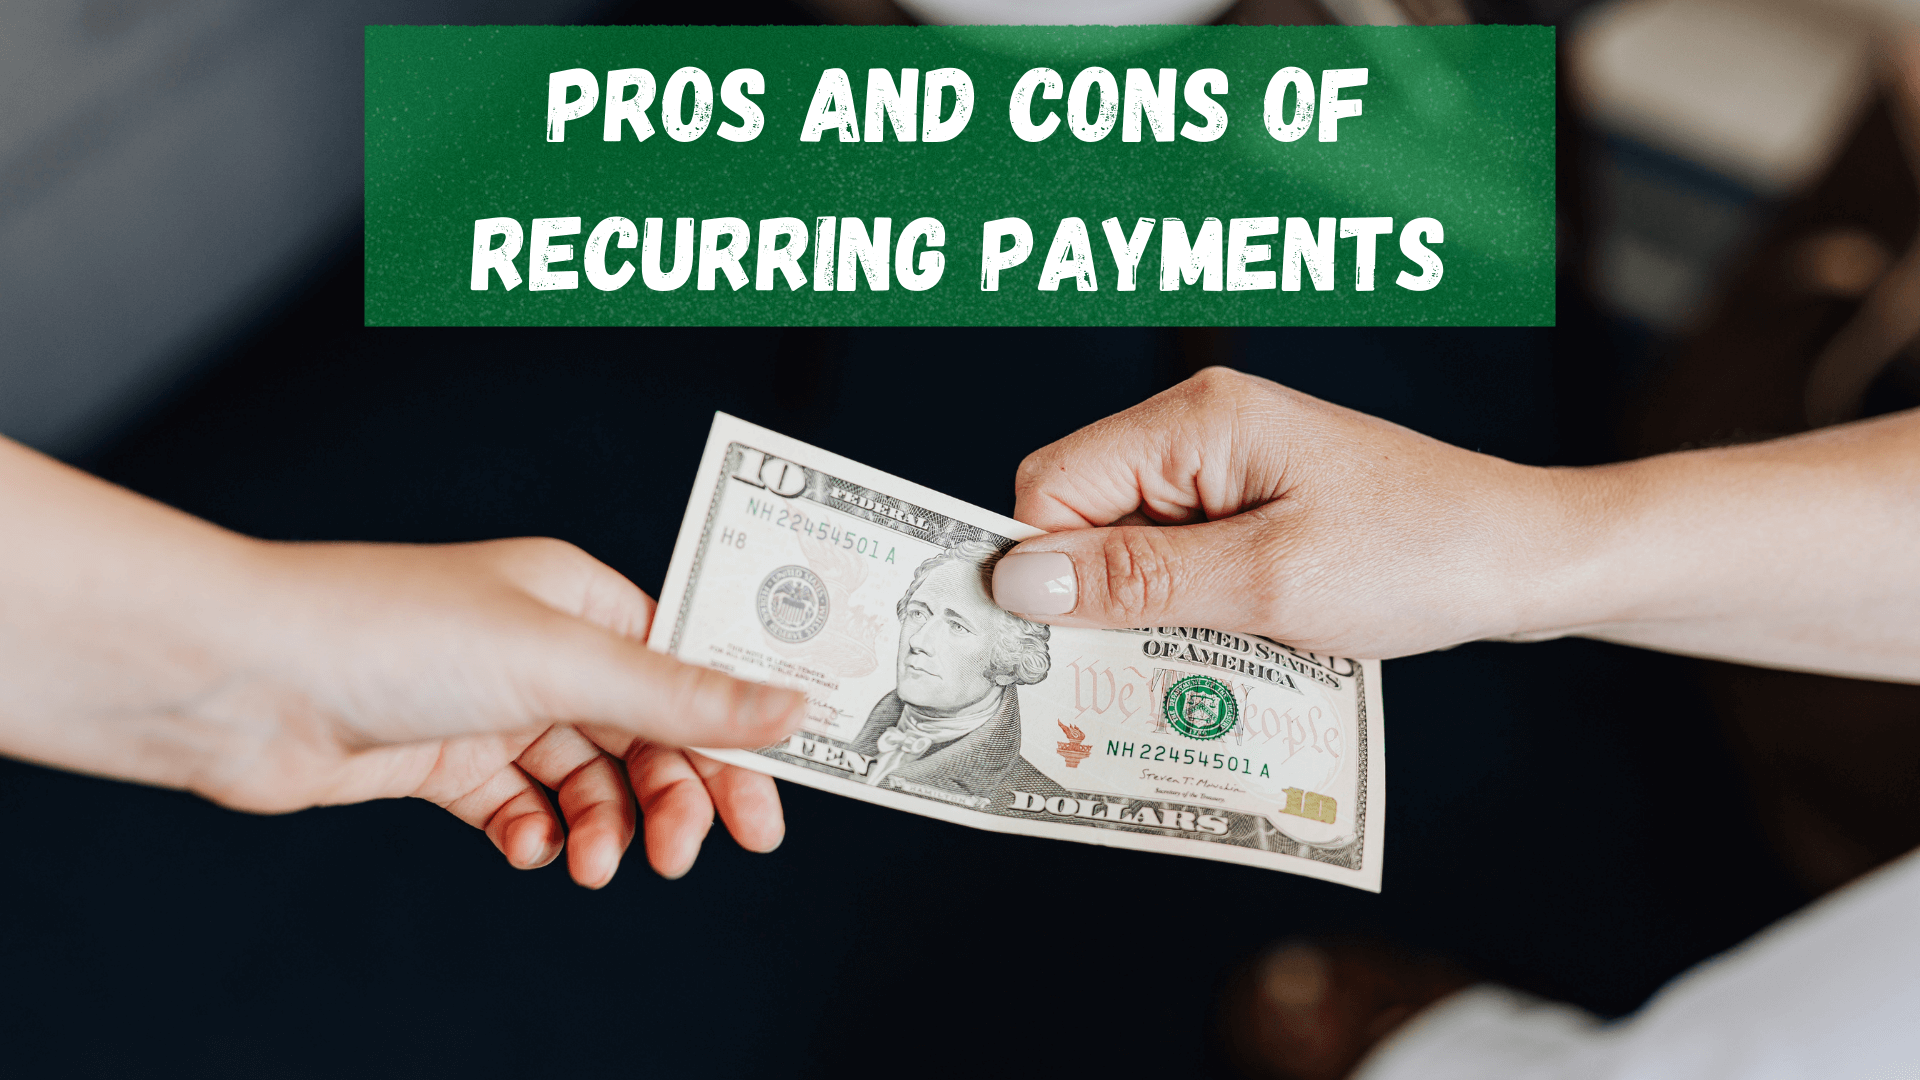 These are the pros and cons of recurring payments you need to know for you to decide if this payment processing method suits your business.